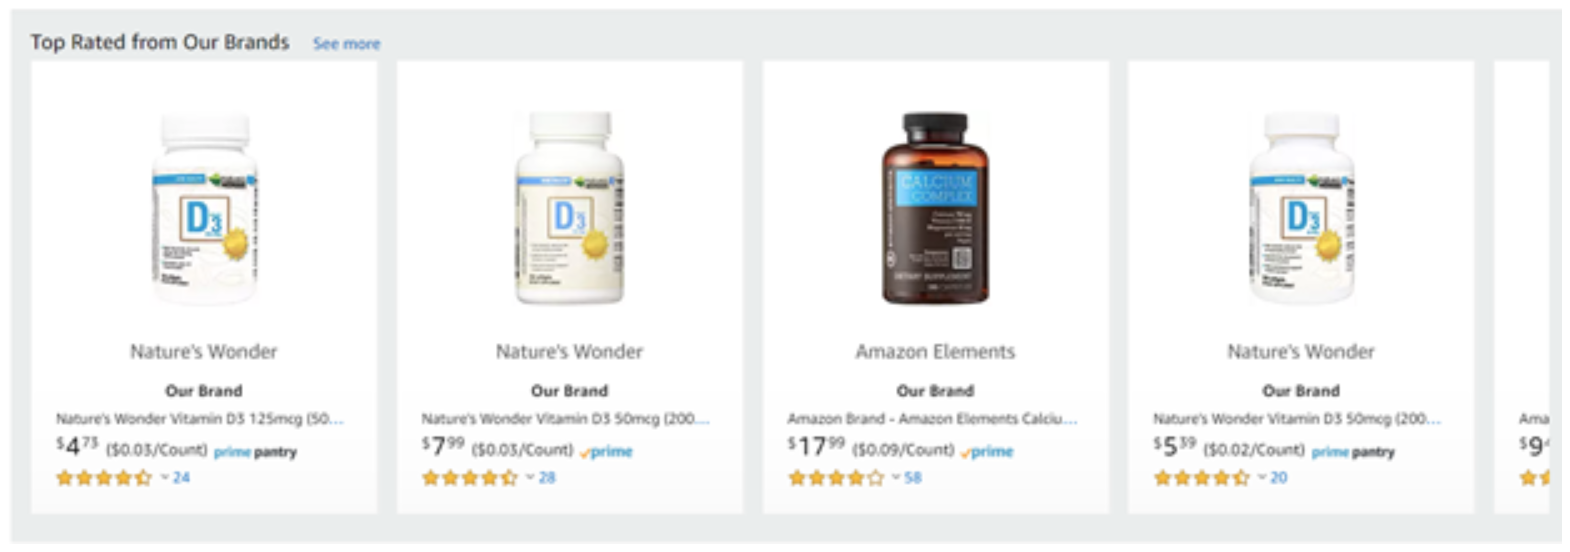 Amazon’s 'Top Rated from Our Brands' box brings their products to the forefront of your search.